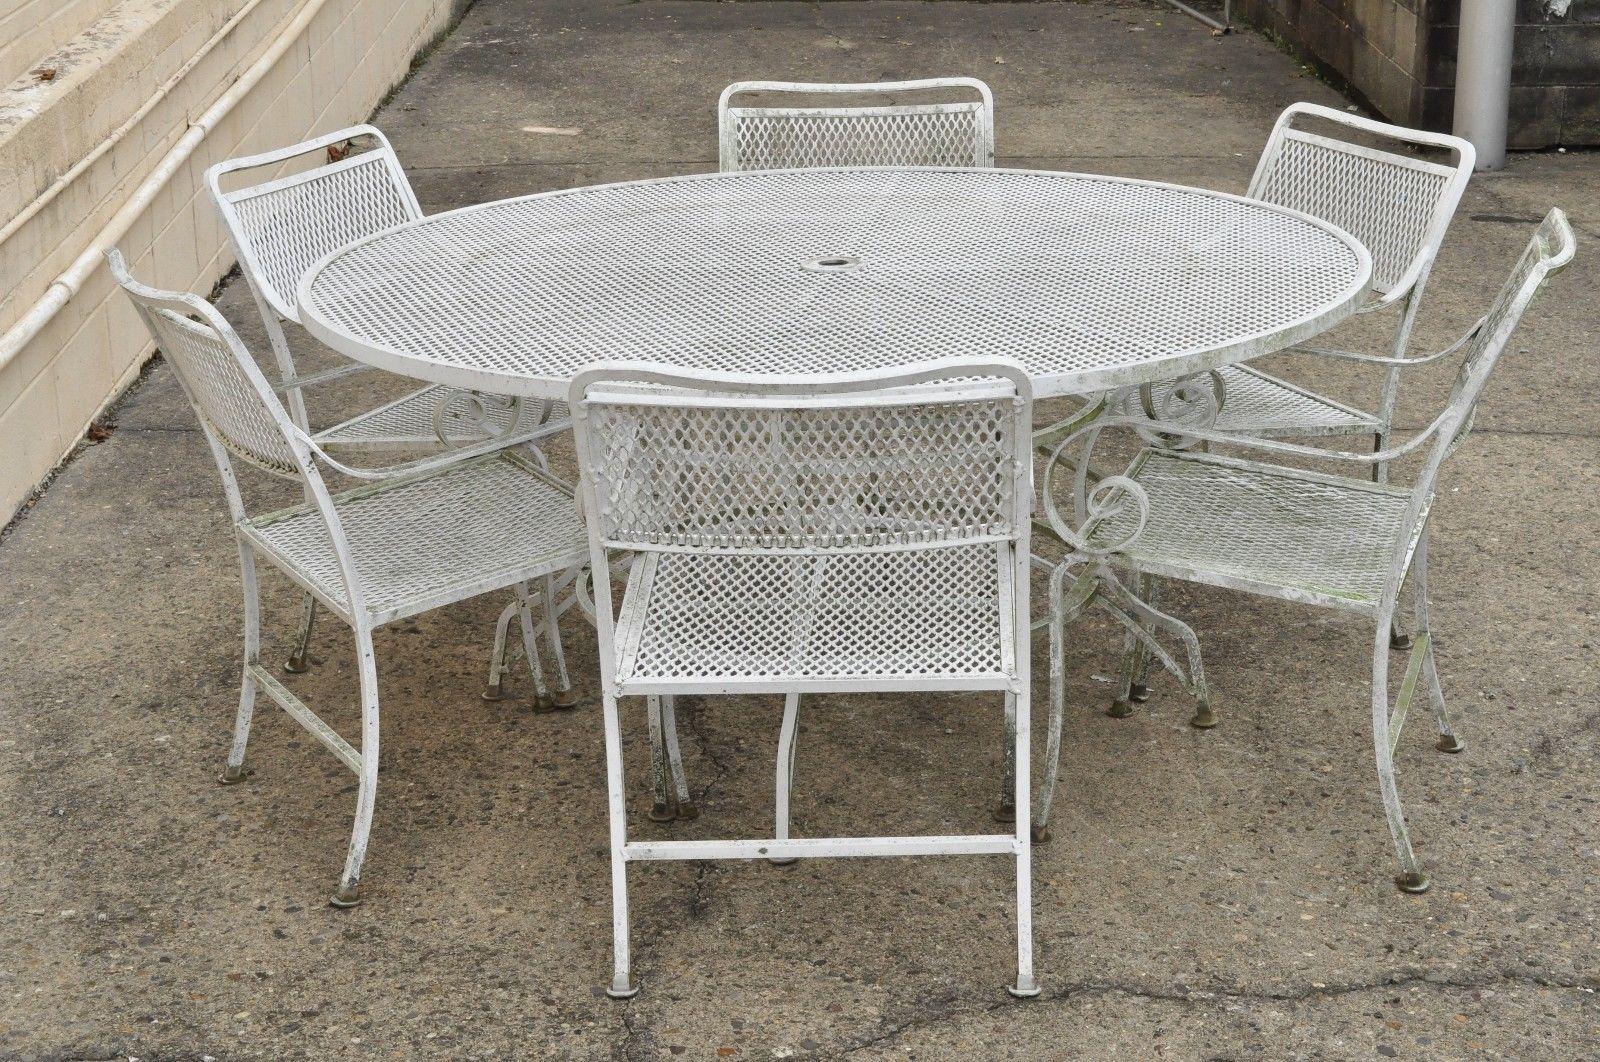 vintage metal patio table and chairs